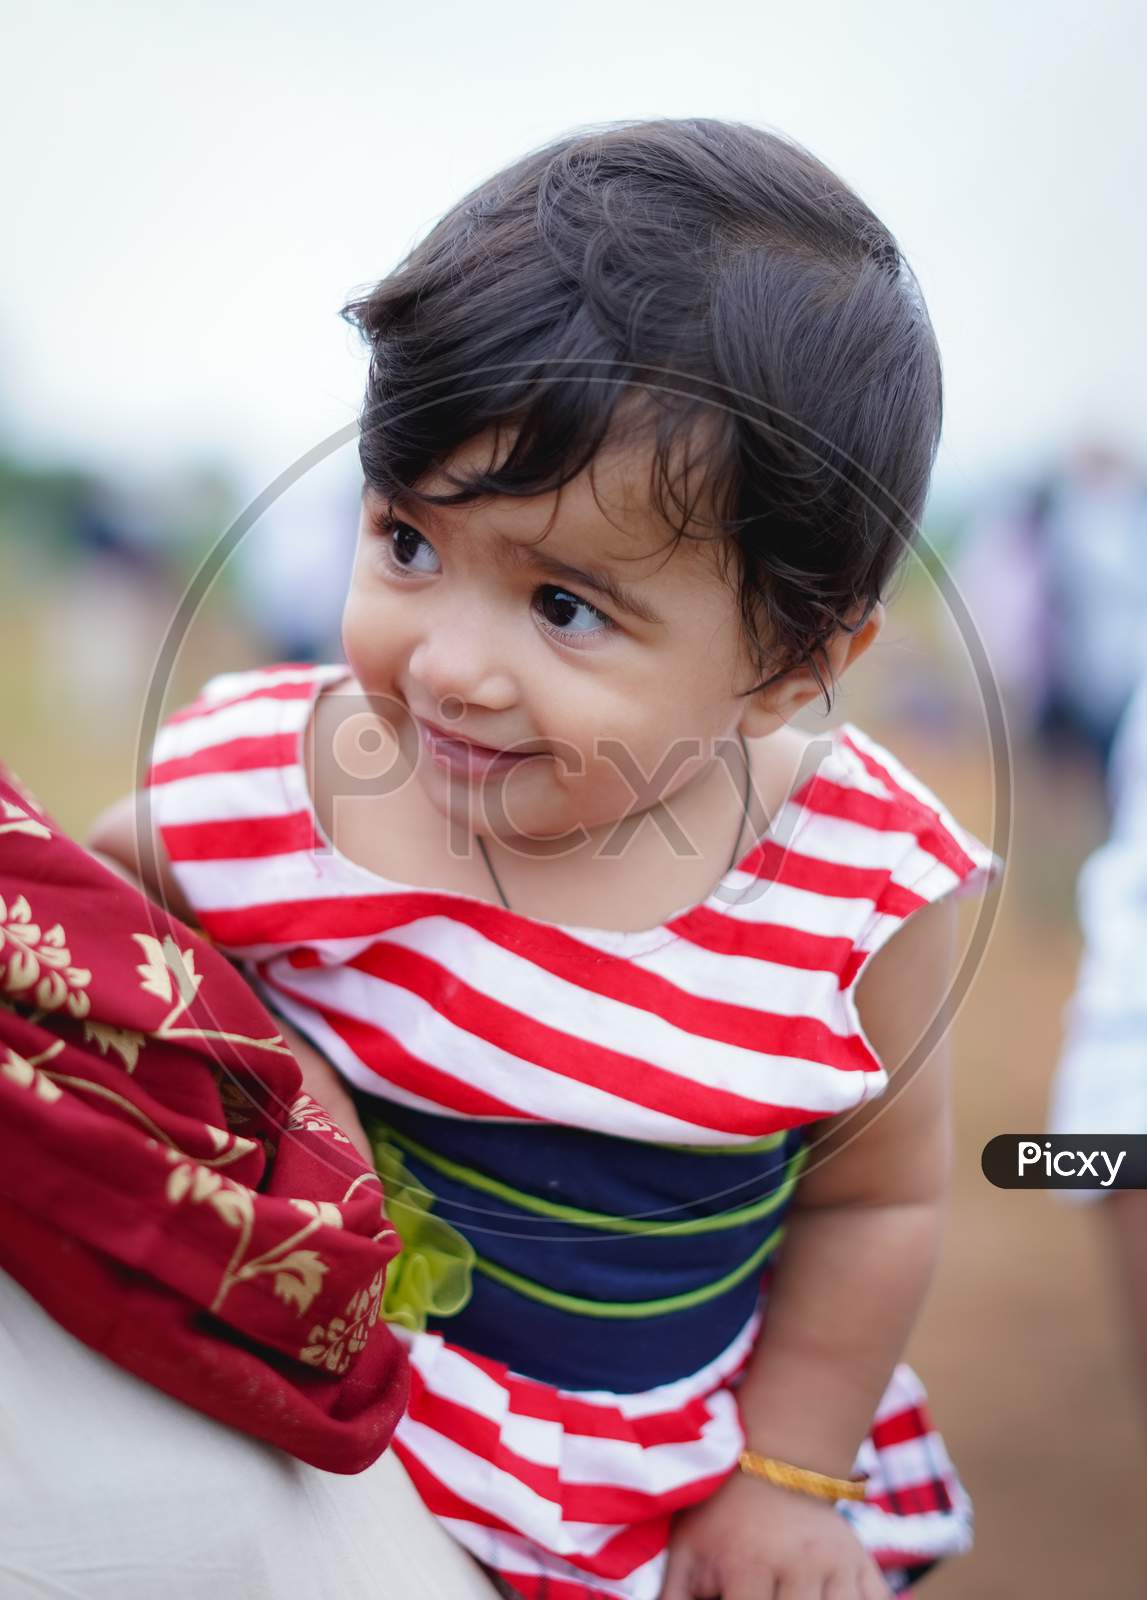 A kid with cute smile, portrait shot